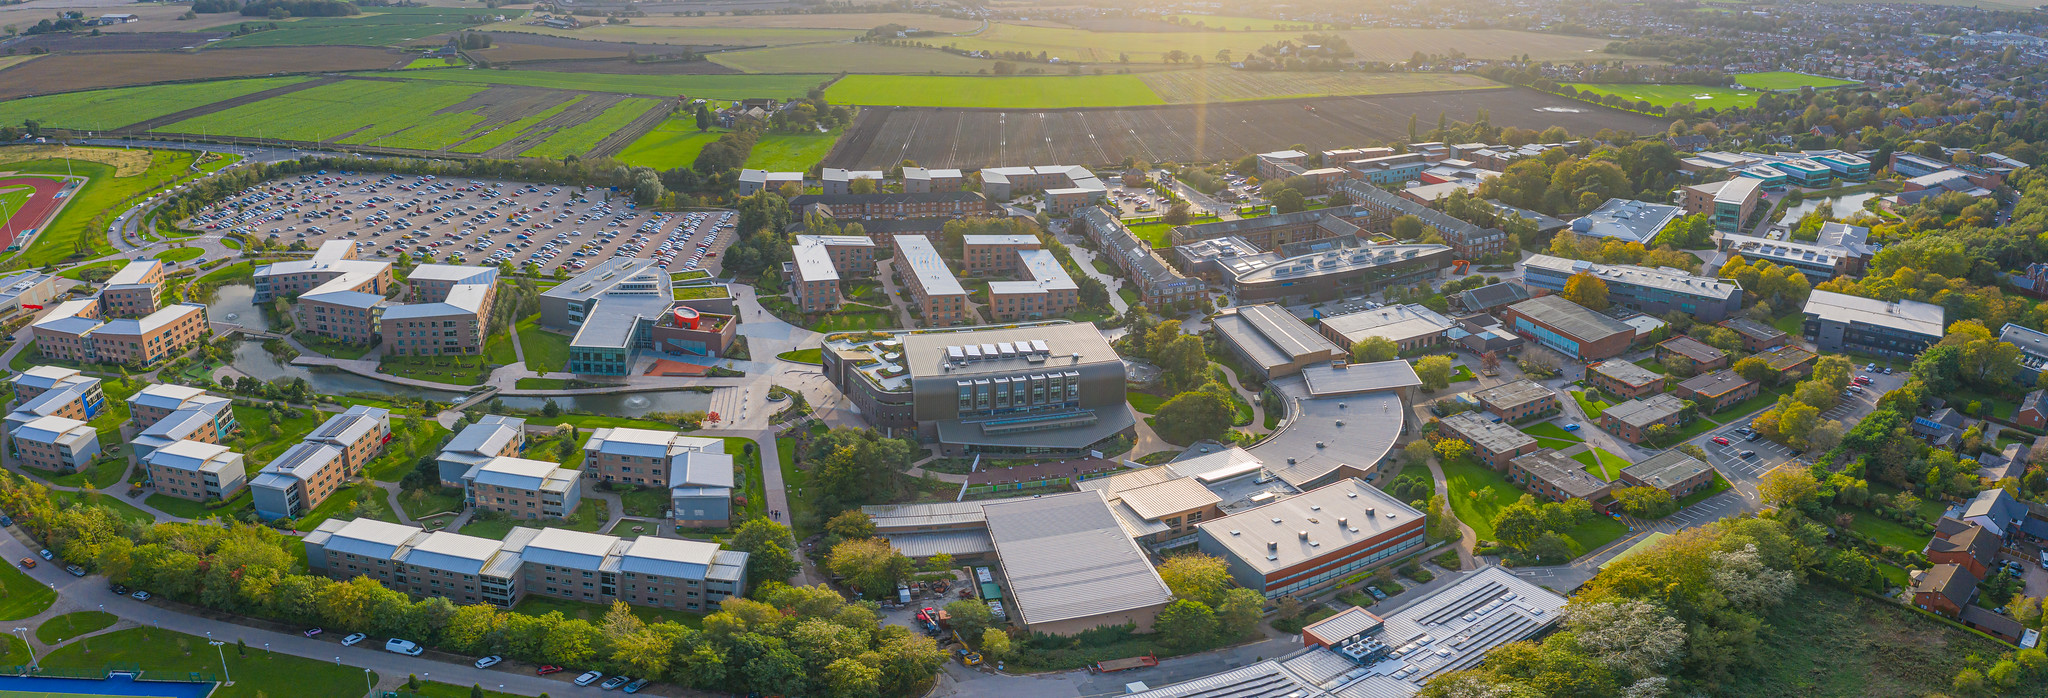 An aerial image of Edge Hill Campus